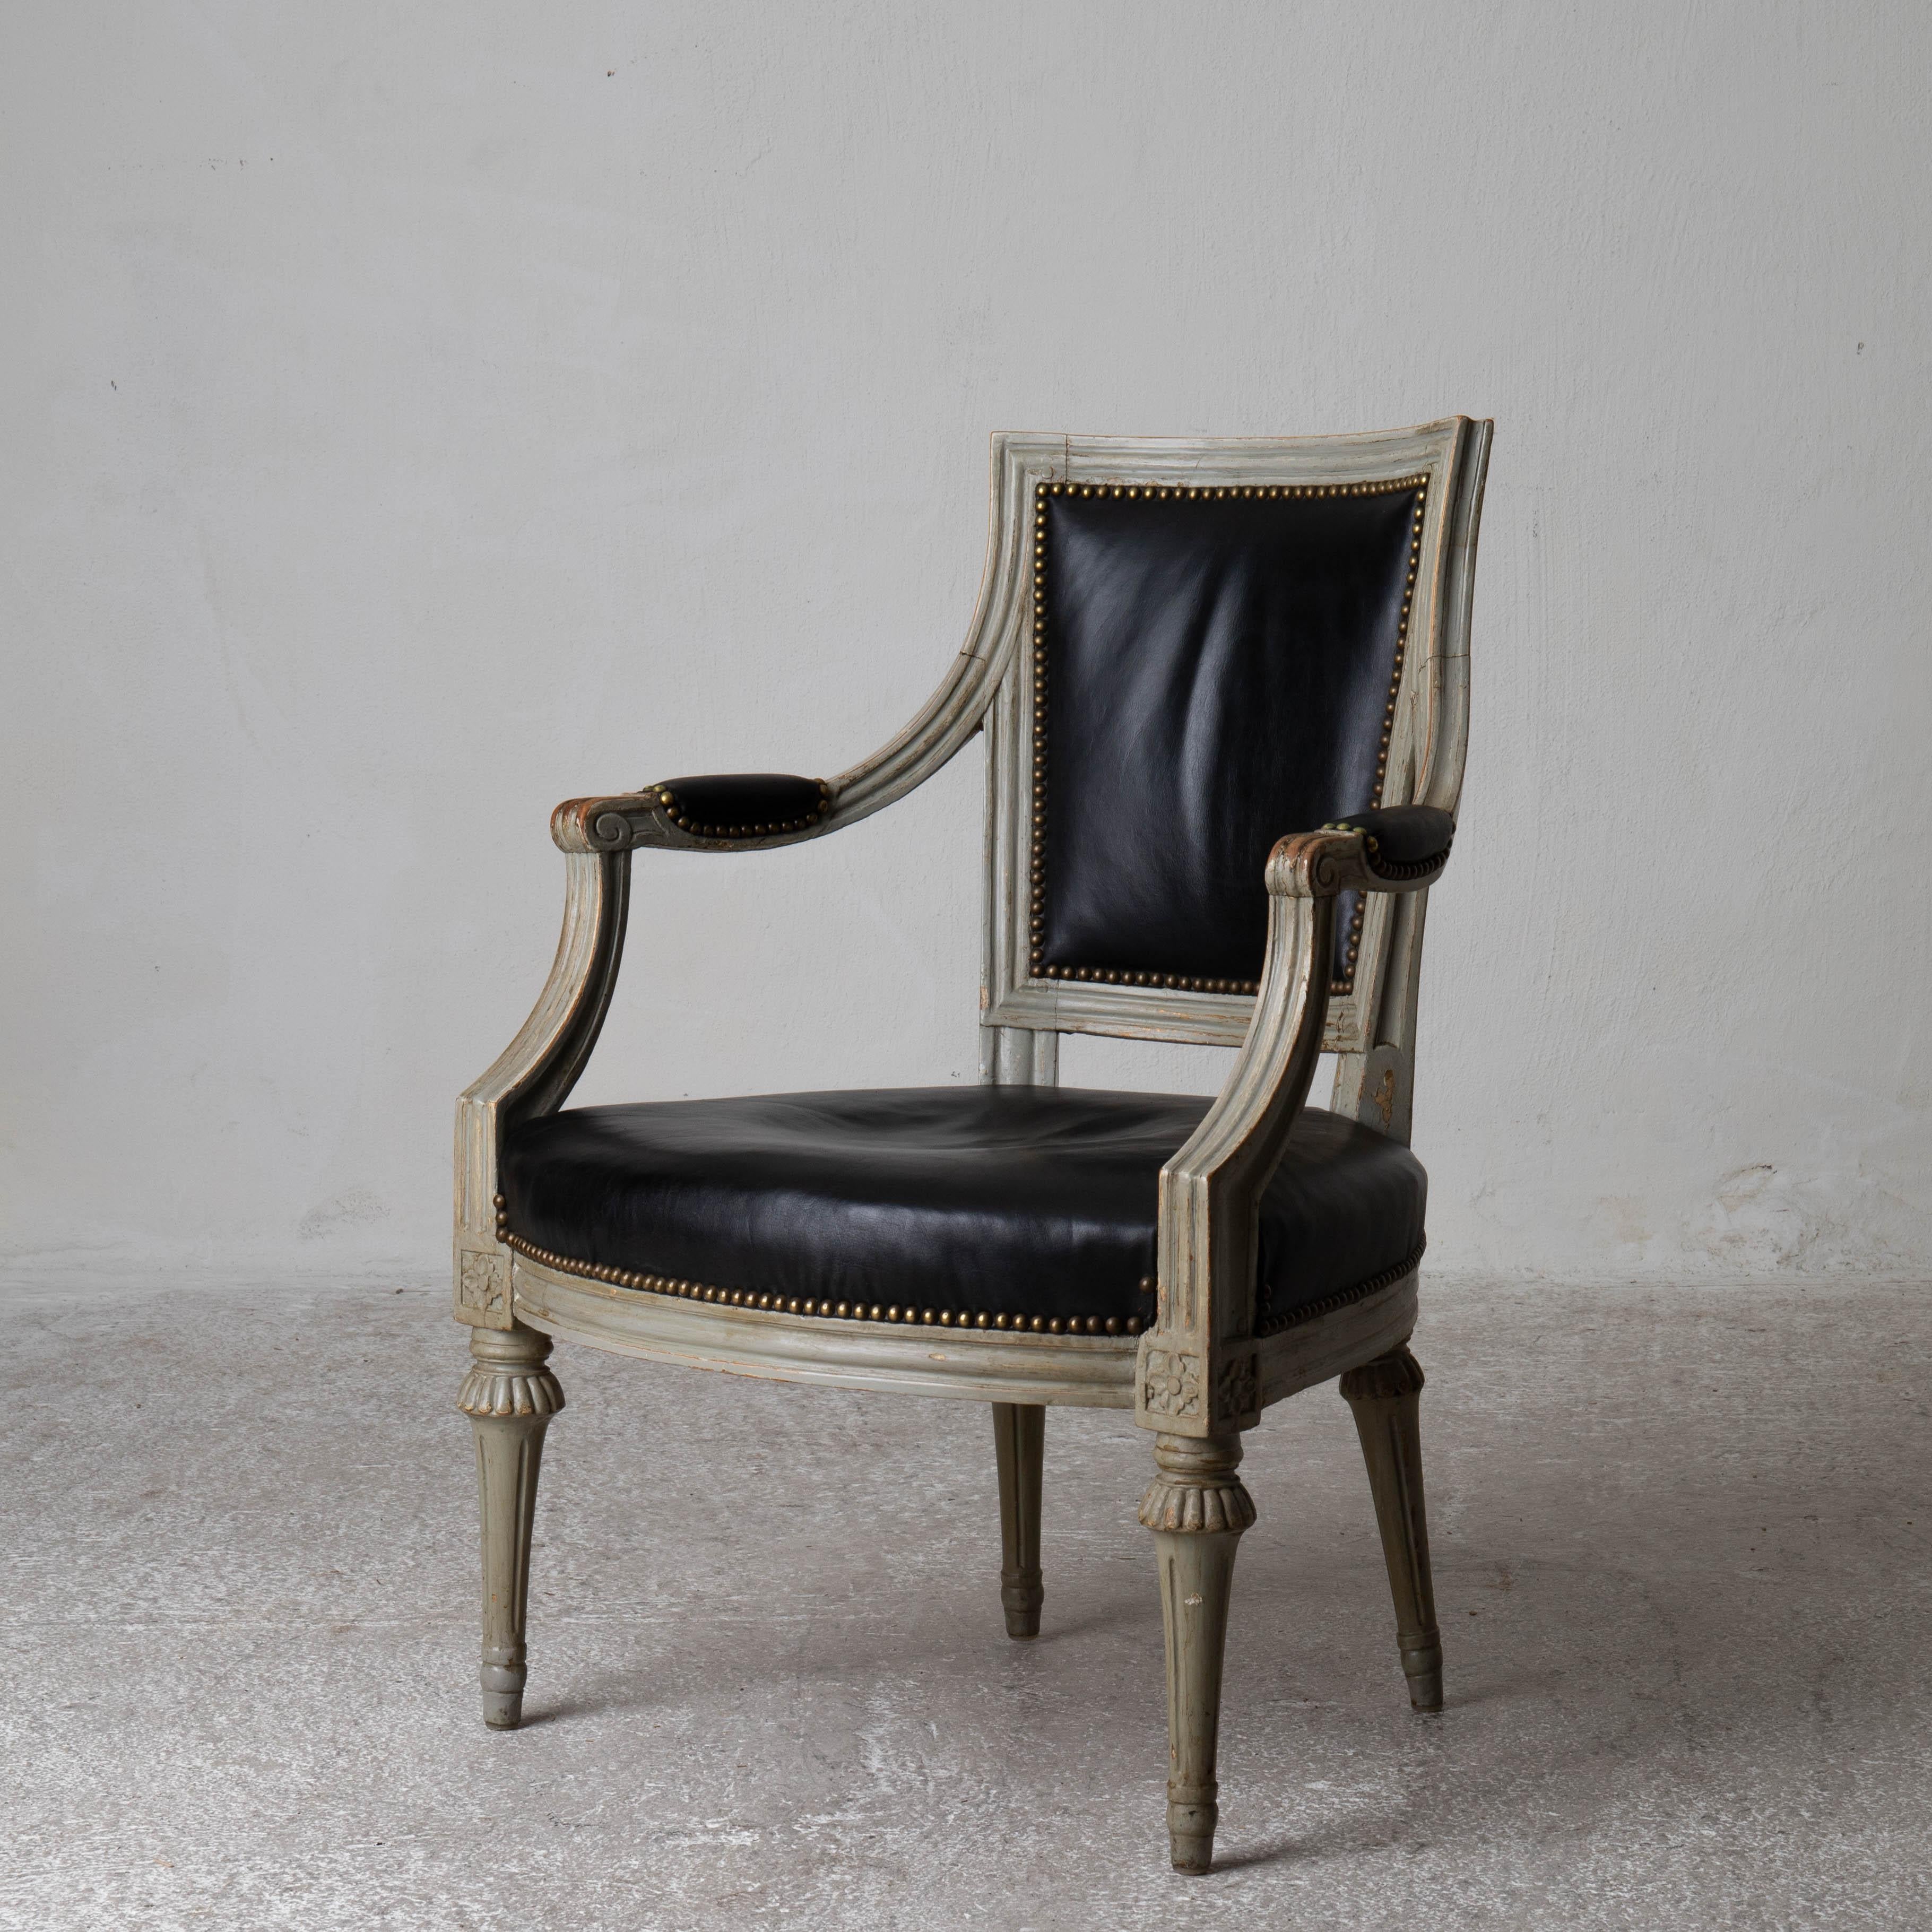 Hand-Painted Armchair Swedish Gustavian 1790-1810 Greenish Frame with Black Upholstery Sweden For Sale